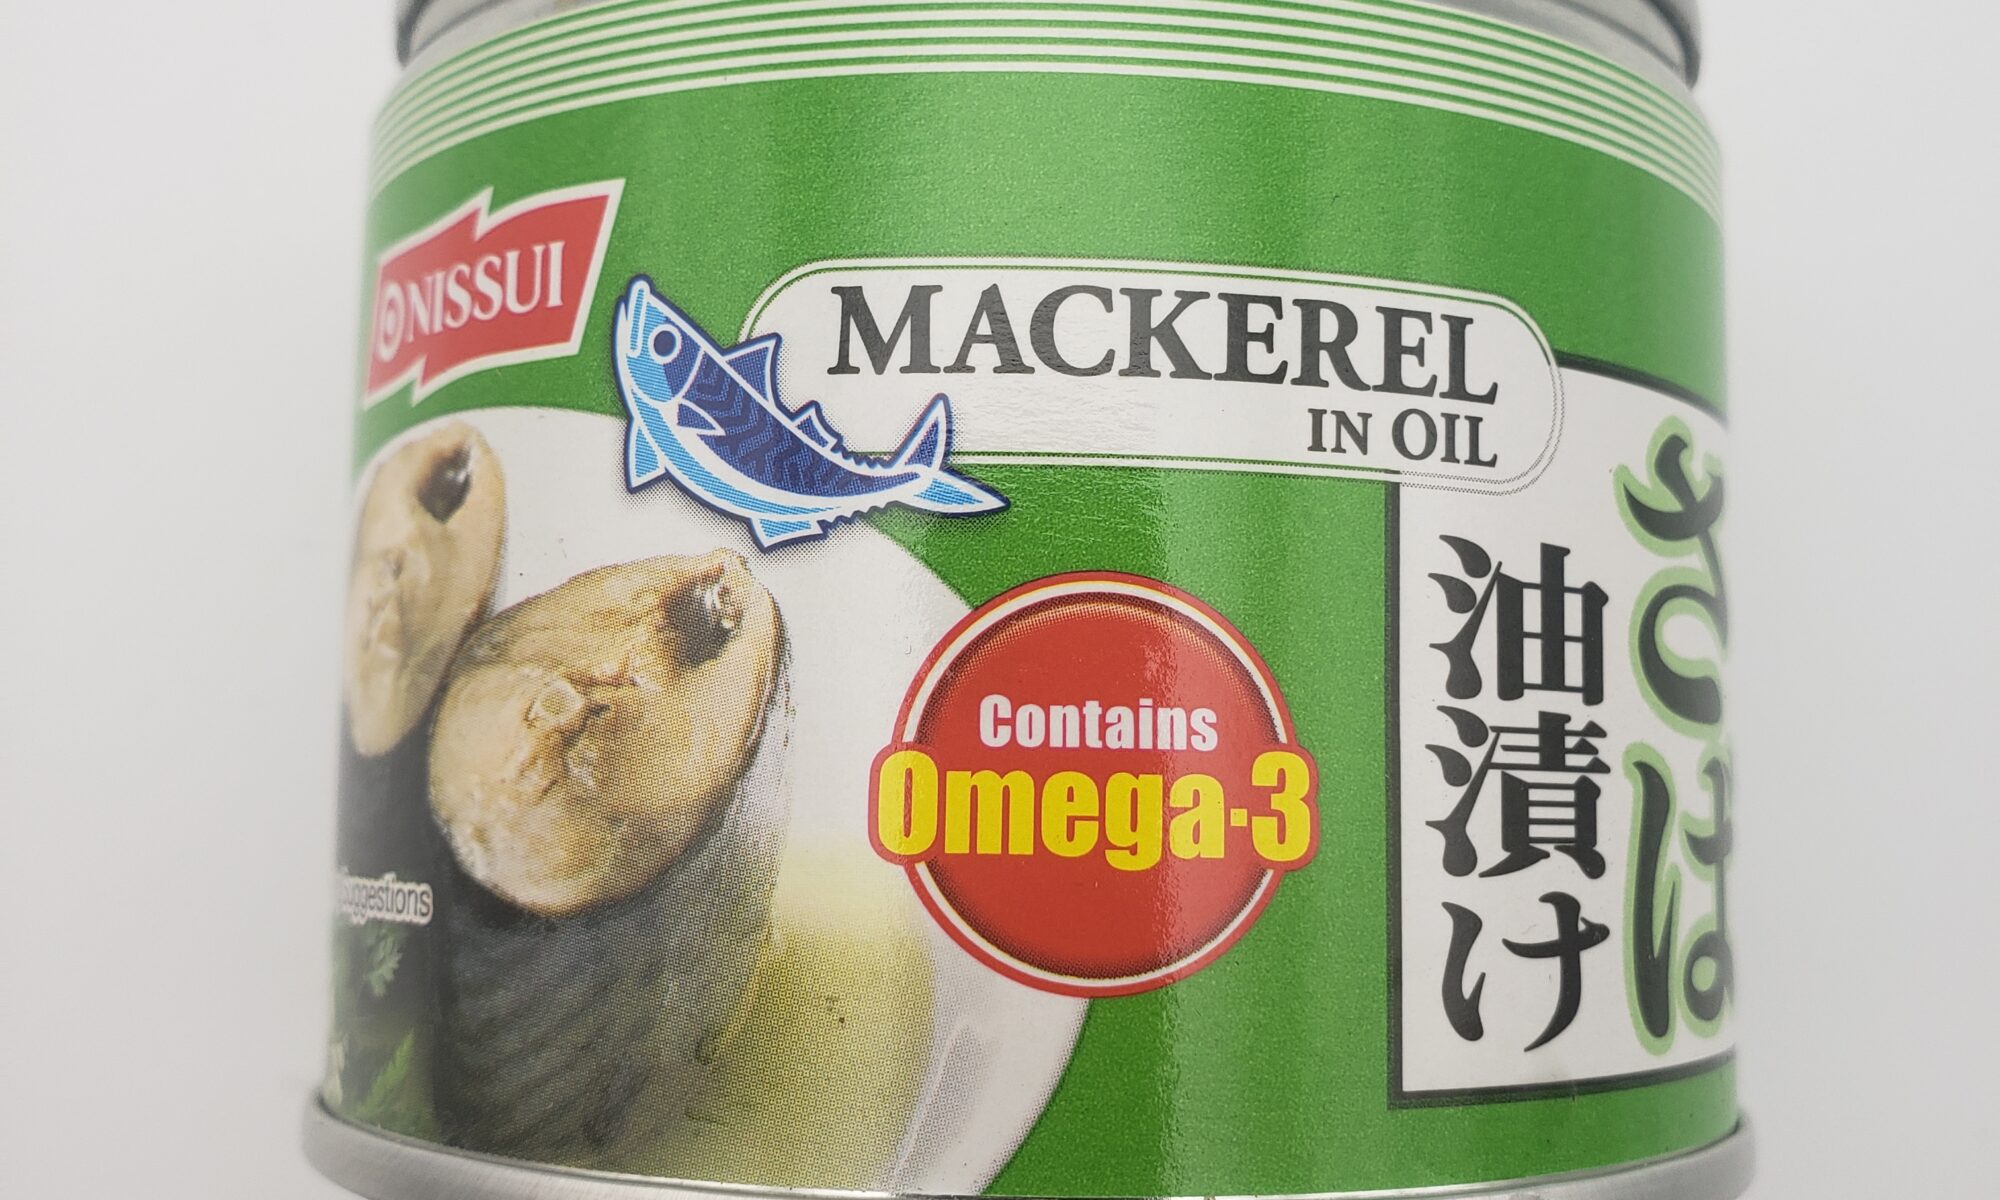 Image of Nissui mackerel in olive oil